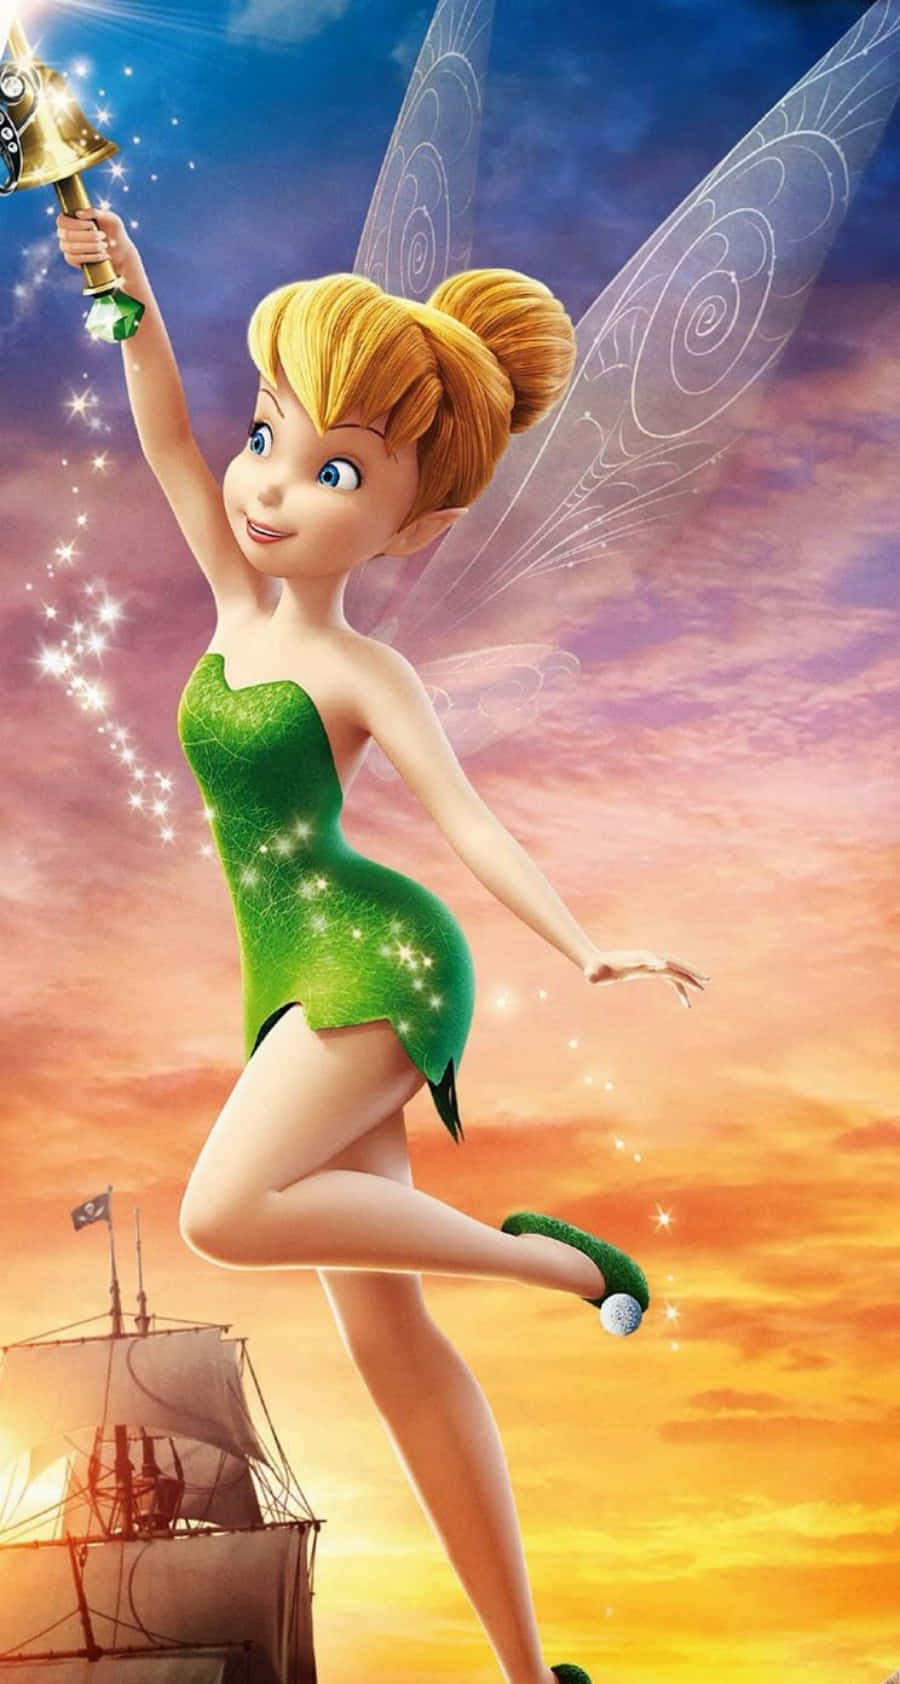 A Dreamy Tinkerbell Appears